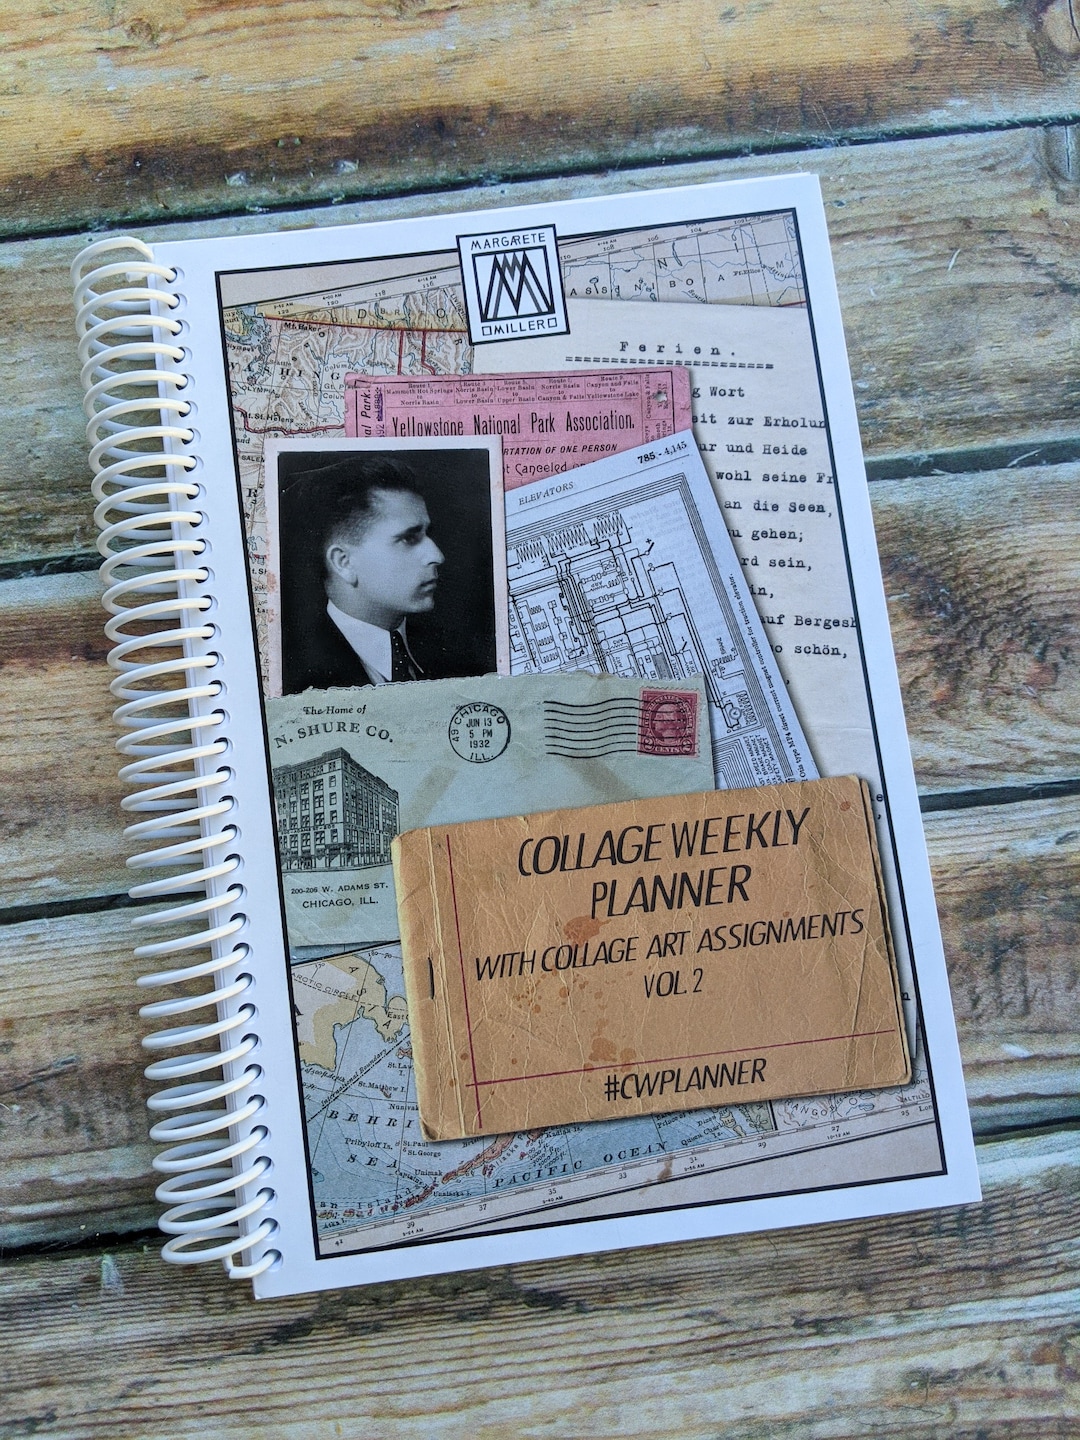 Vol. 1 Collage Weekly Planner With Collage-art Assignments 